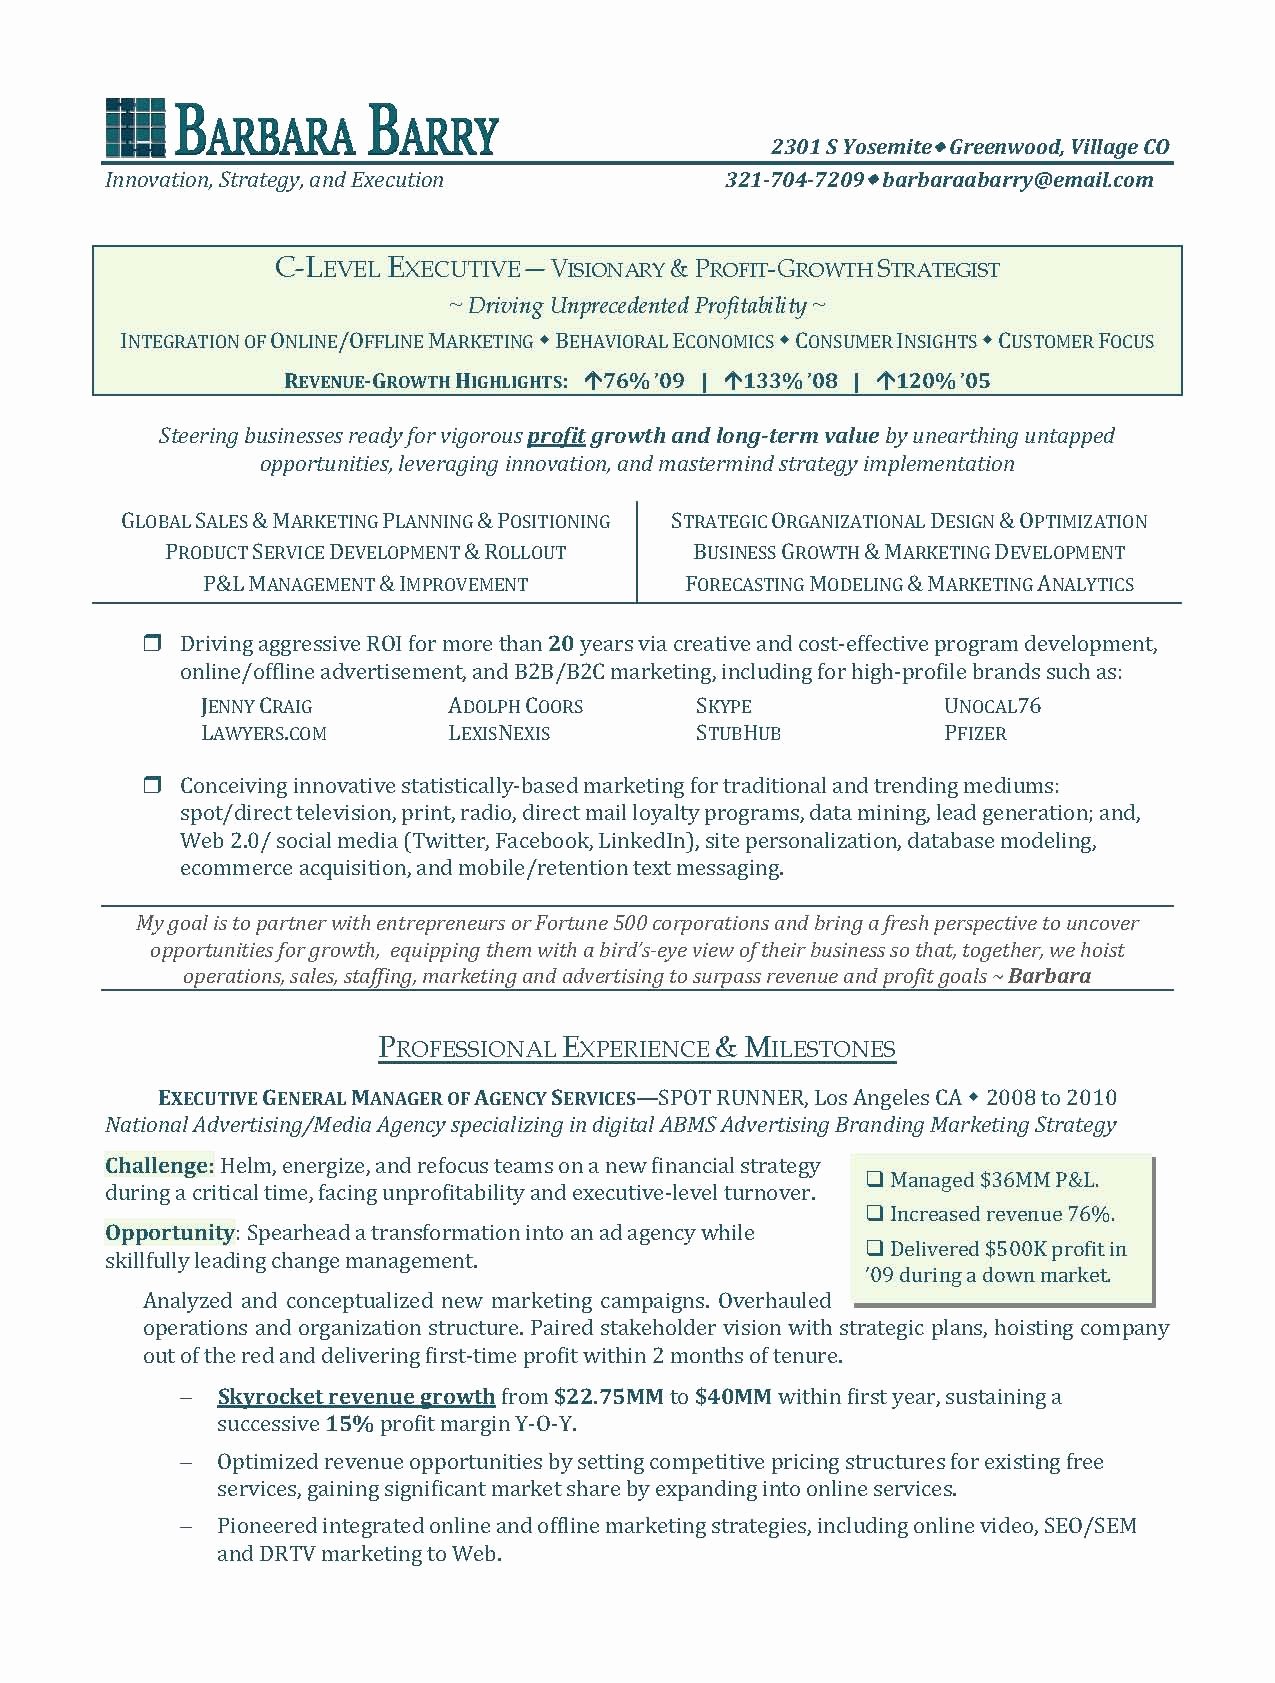 Resume Writing Services Line Axiomseducation